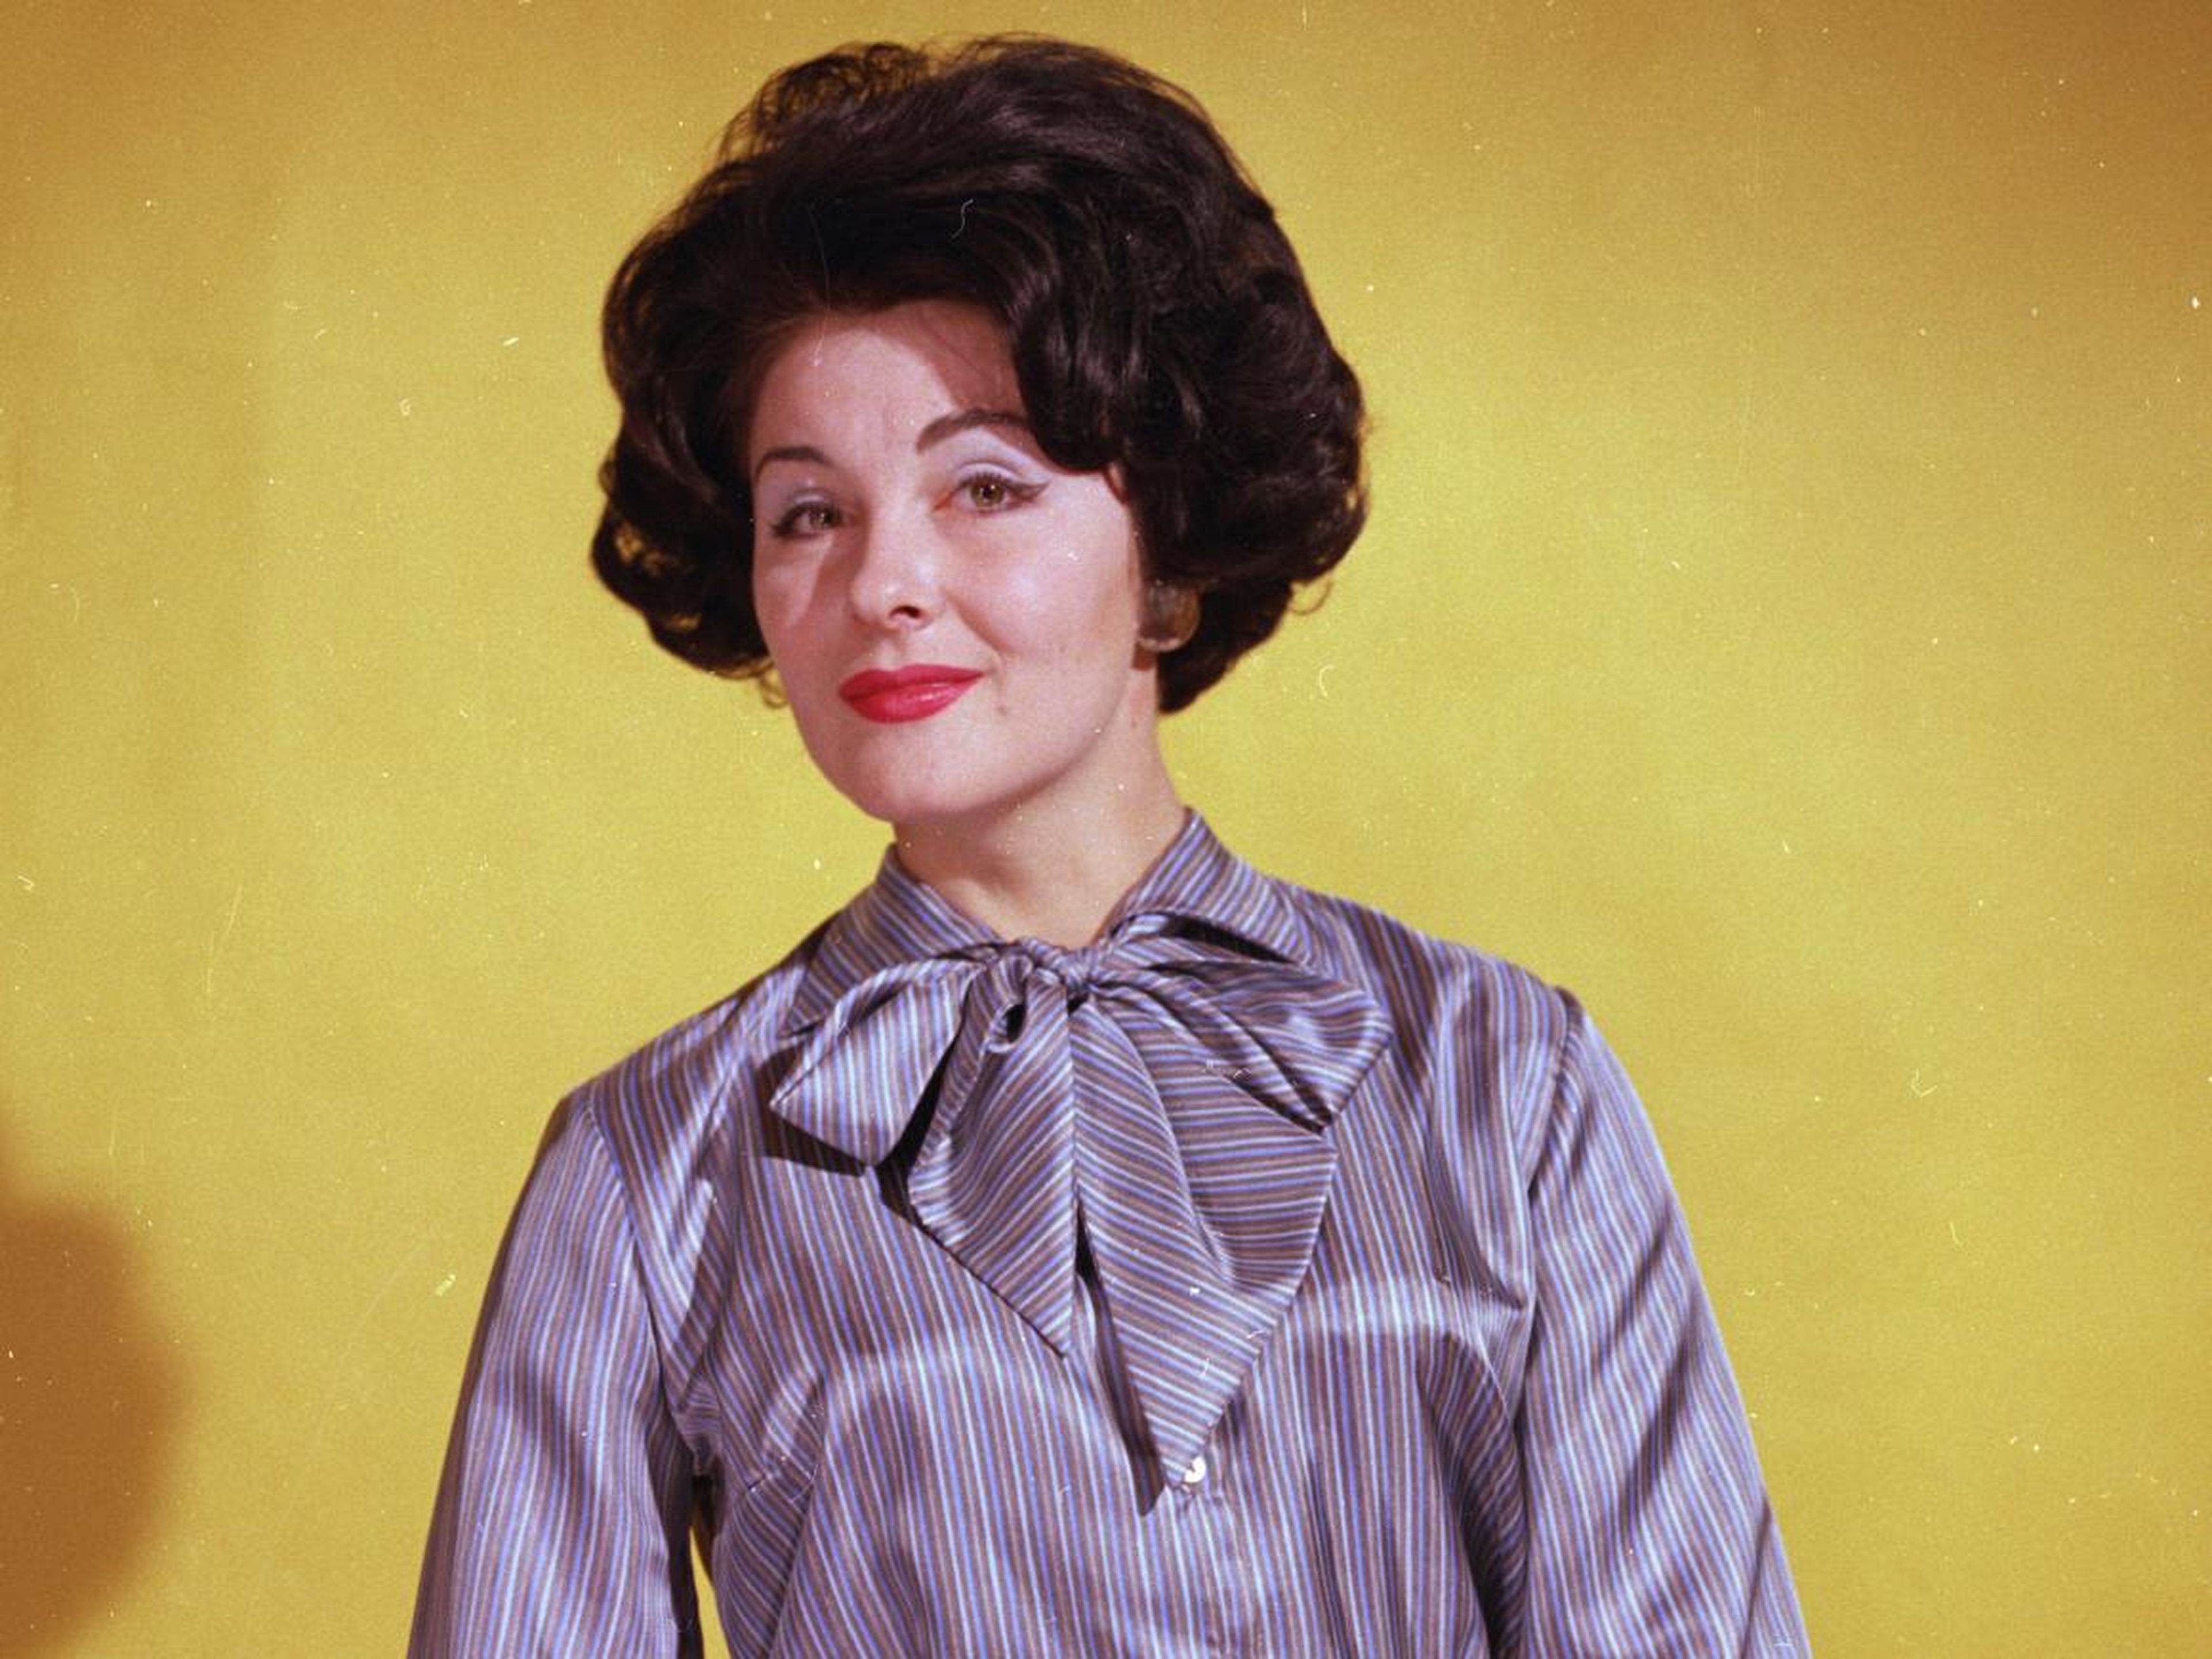 One fashion trend in particular took on special significance for career-oriented women. Pussy-bow blouses were viewed as a fitting equivalent to the traditional masculine suit-and-tie look. As outgoing Hewlett-Packard CEO Meg